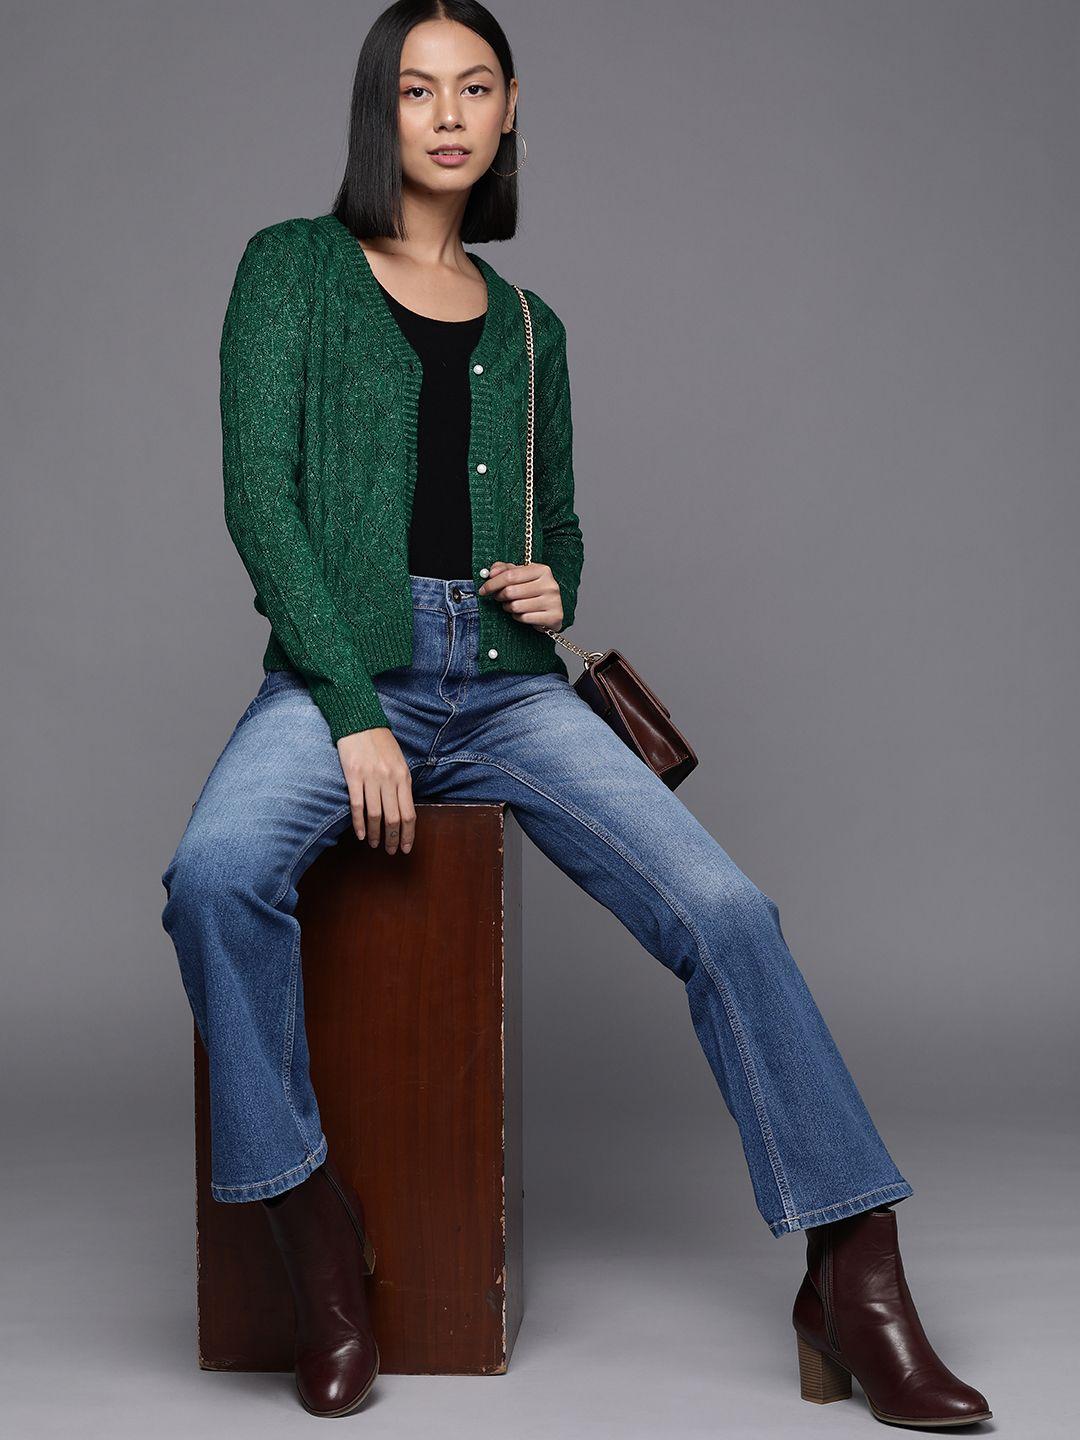 allen solly woman green cable knit cardigan